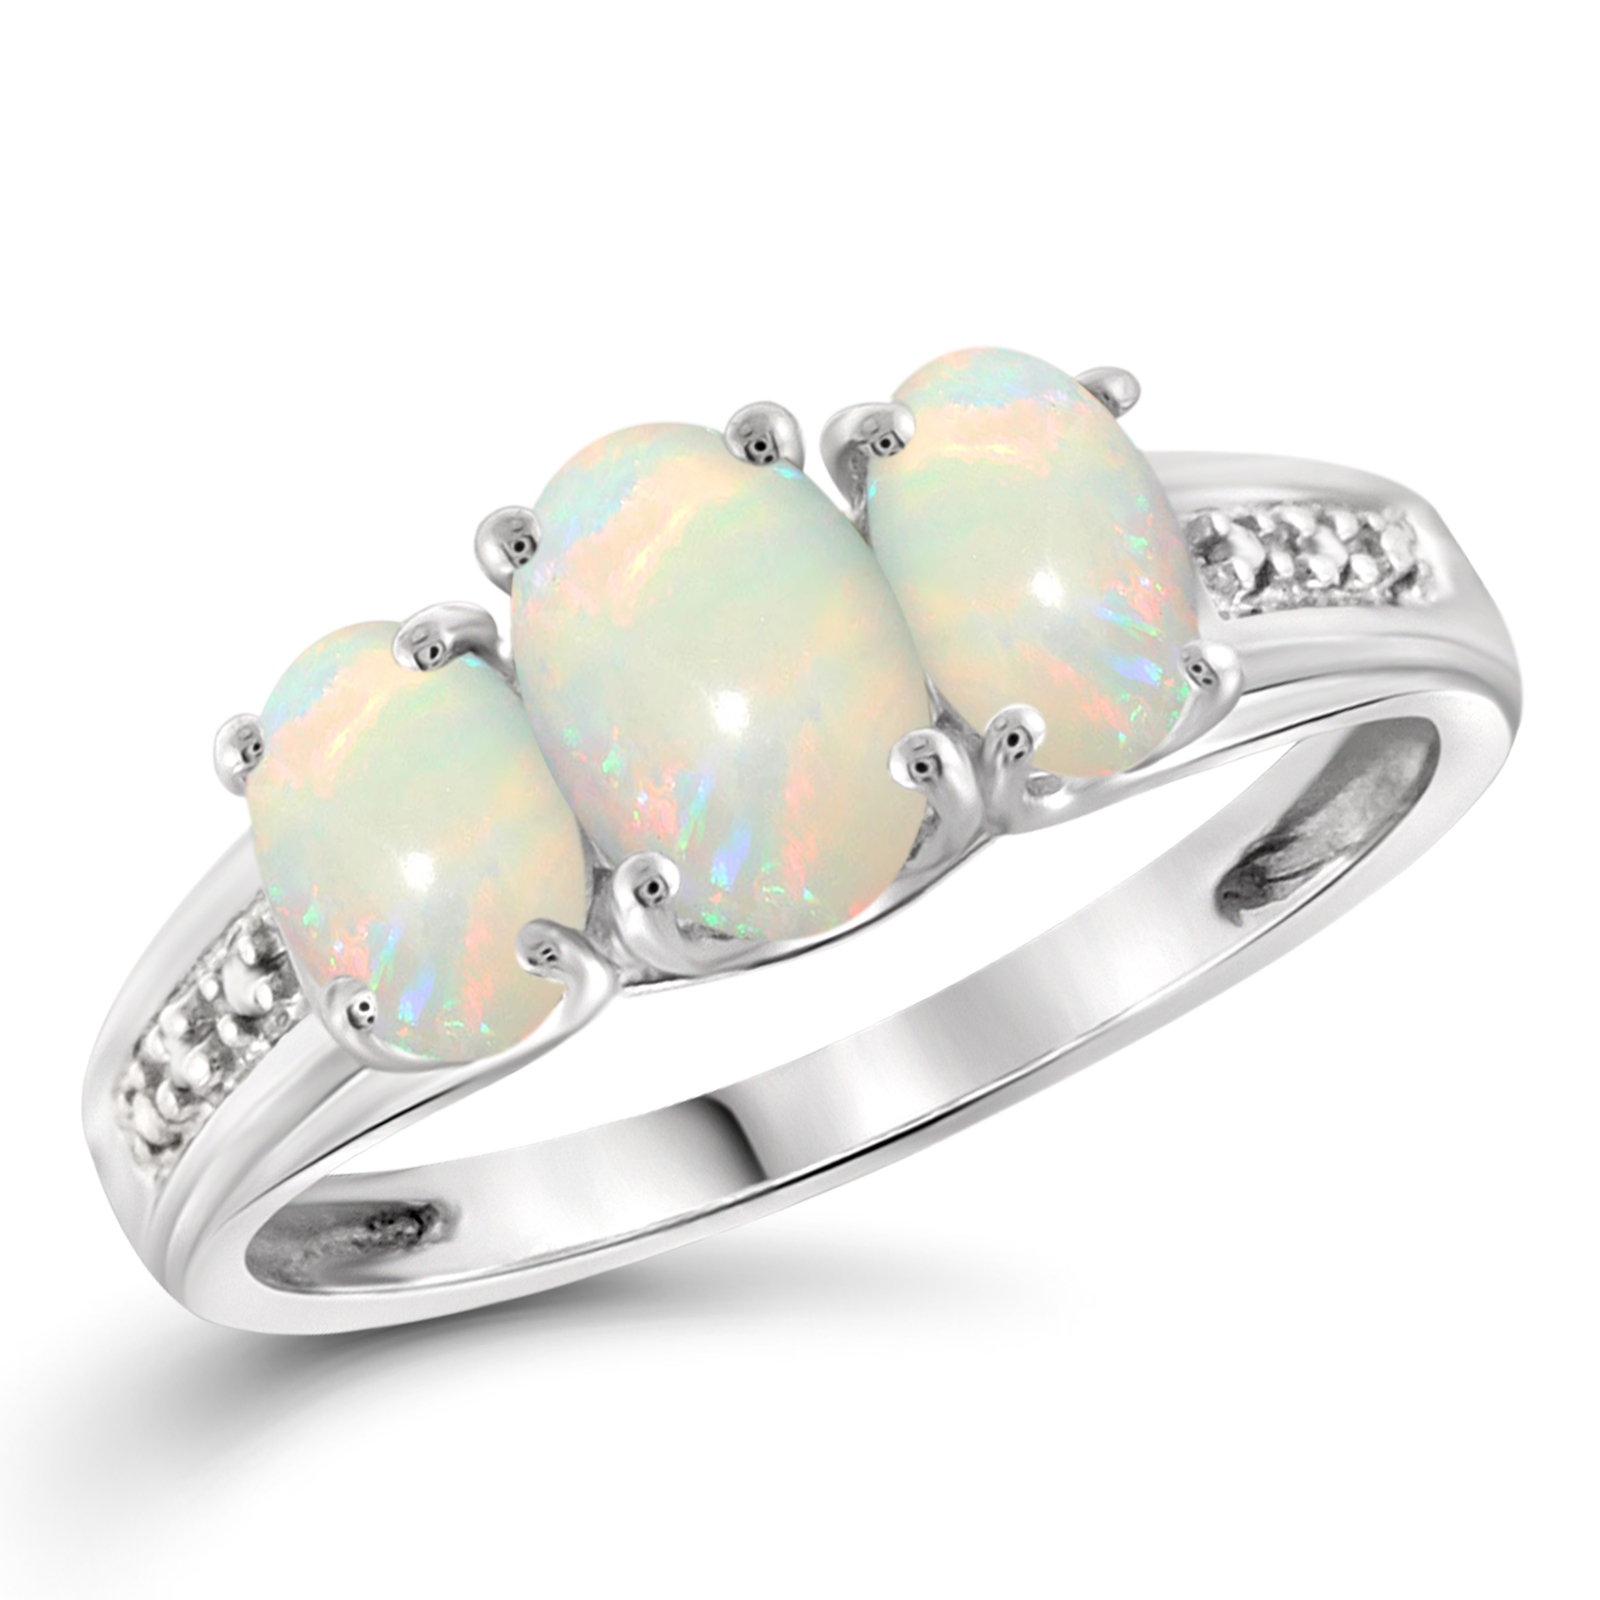 1.00 CTTW Created Opal Gemstone & Accent White Diamond Ring In Sterling Silver